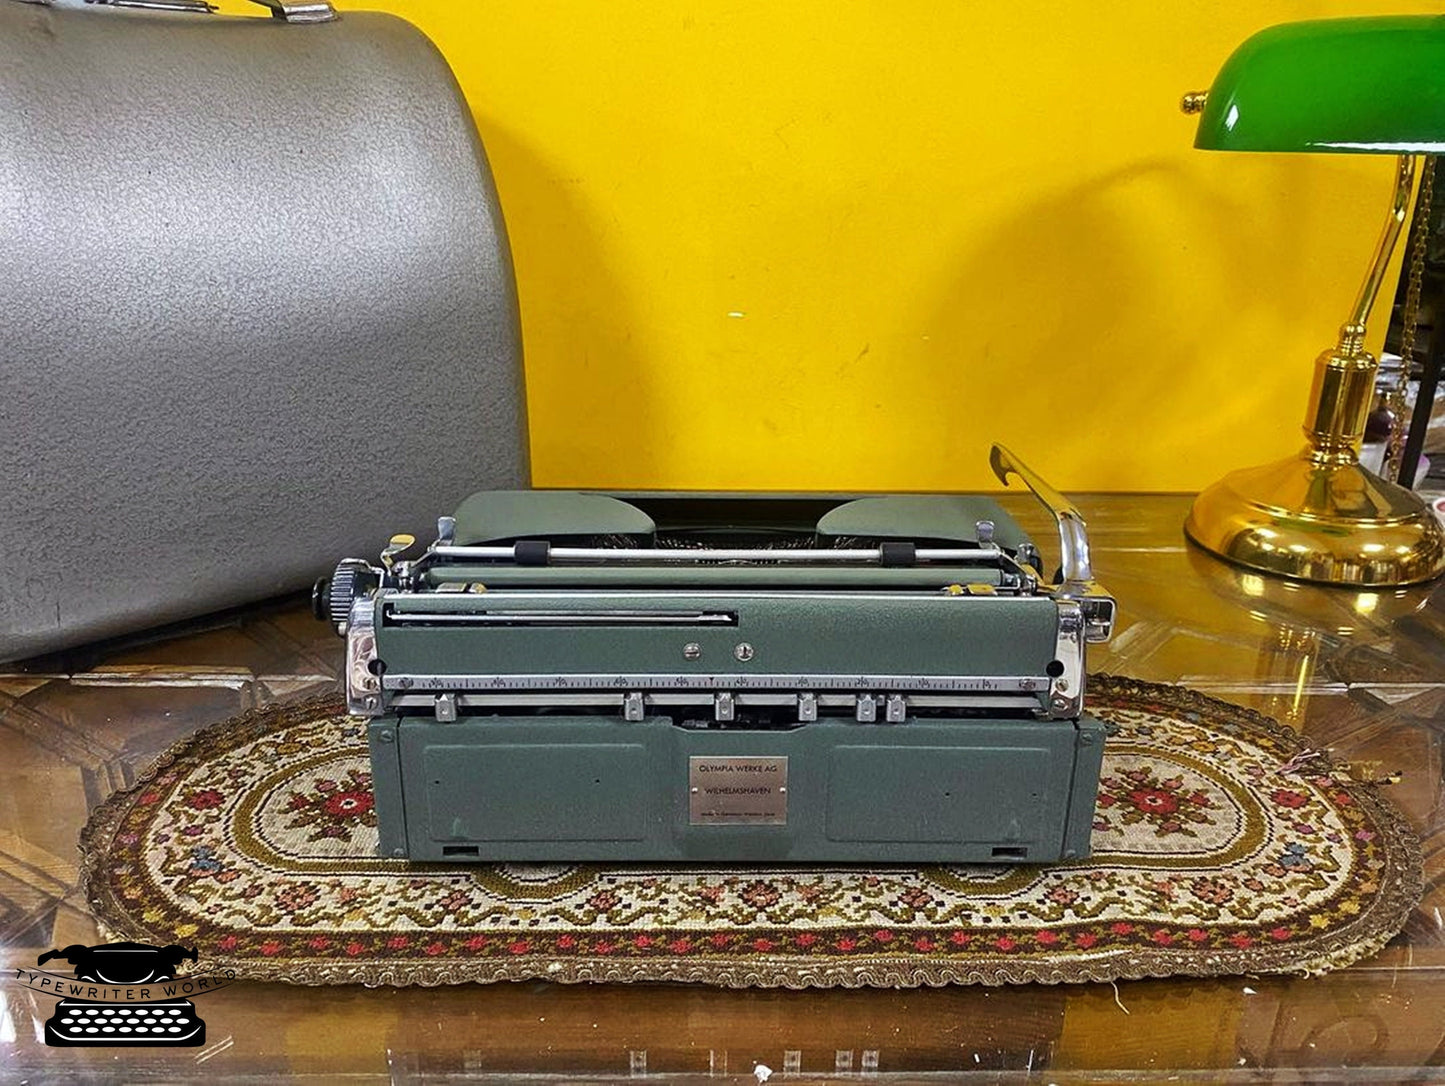 Vintage Olympia SM3 Green Typewriter - Working and Fully Restored to its Original Color - Ideal for Writers and Collectors